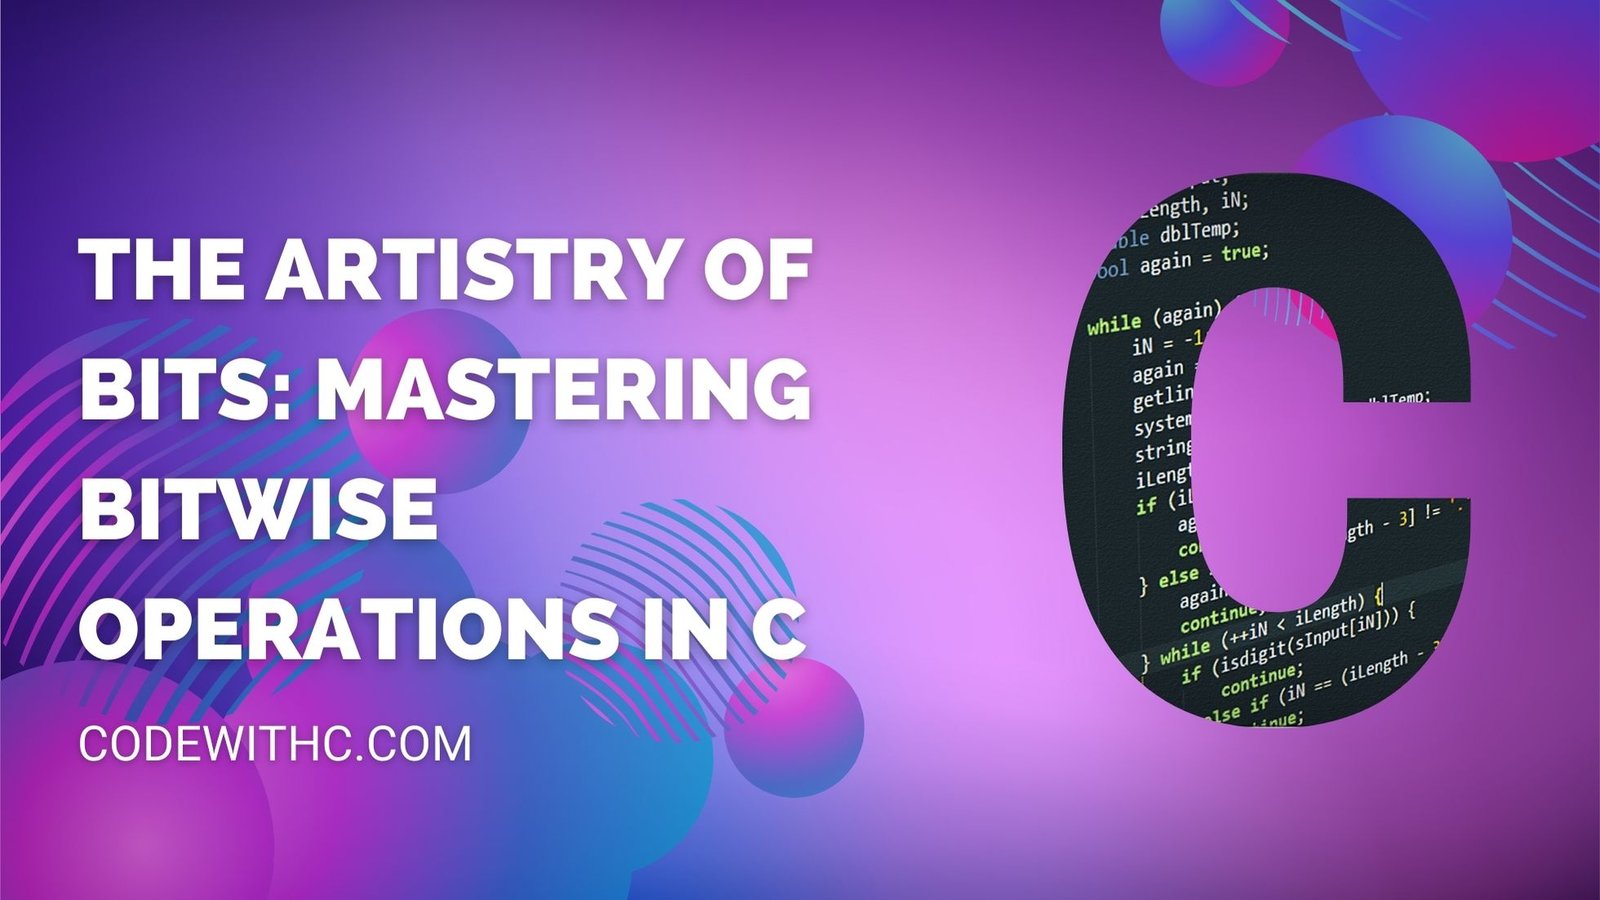 The Artistry of Bits: Mastering Bitwise Operations in C